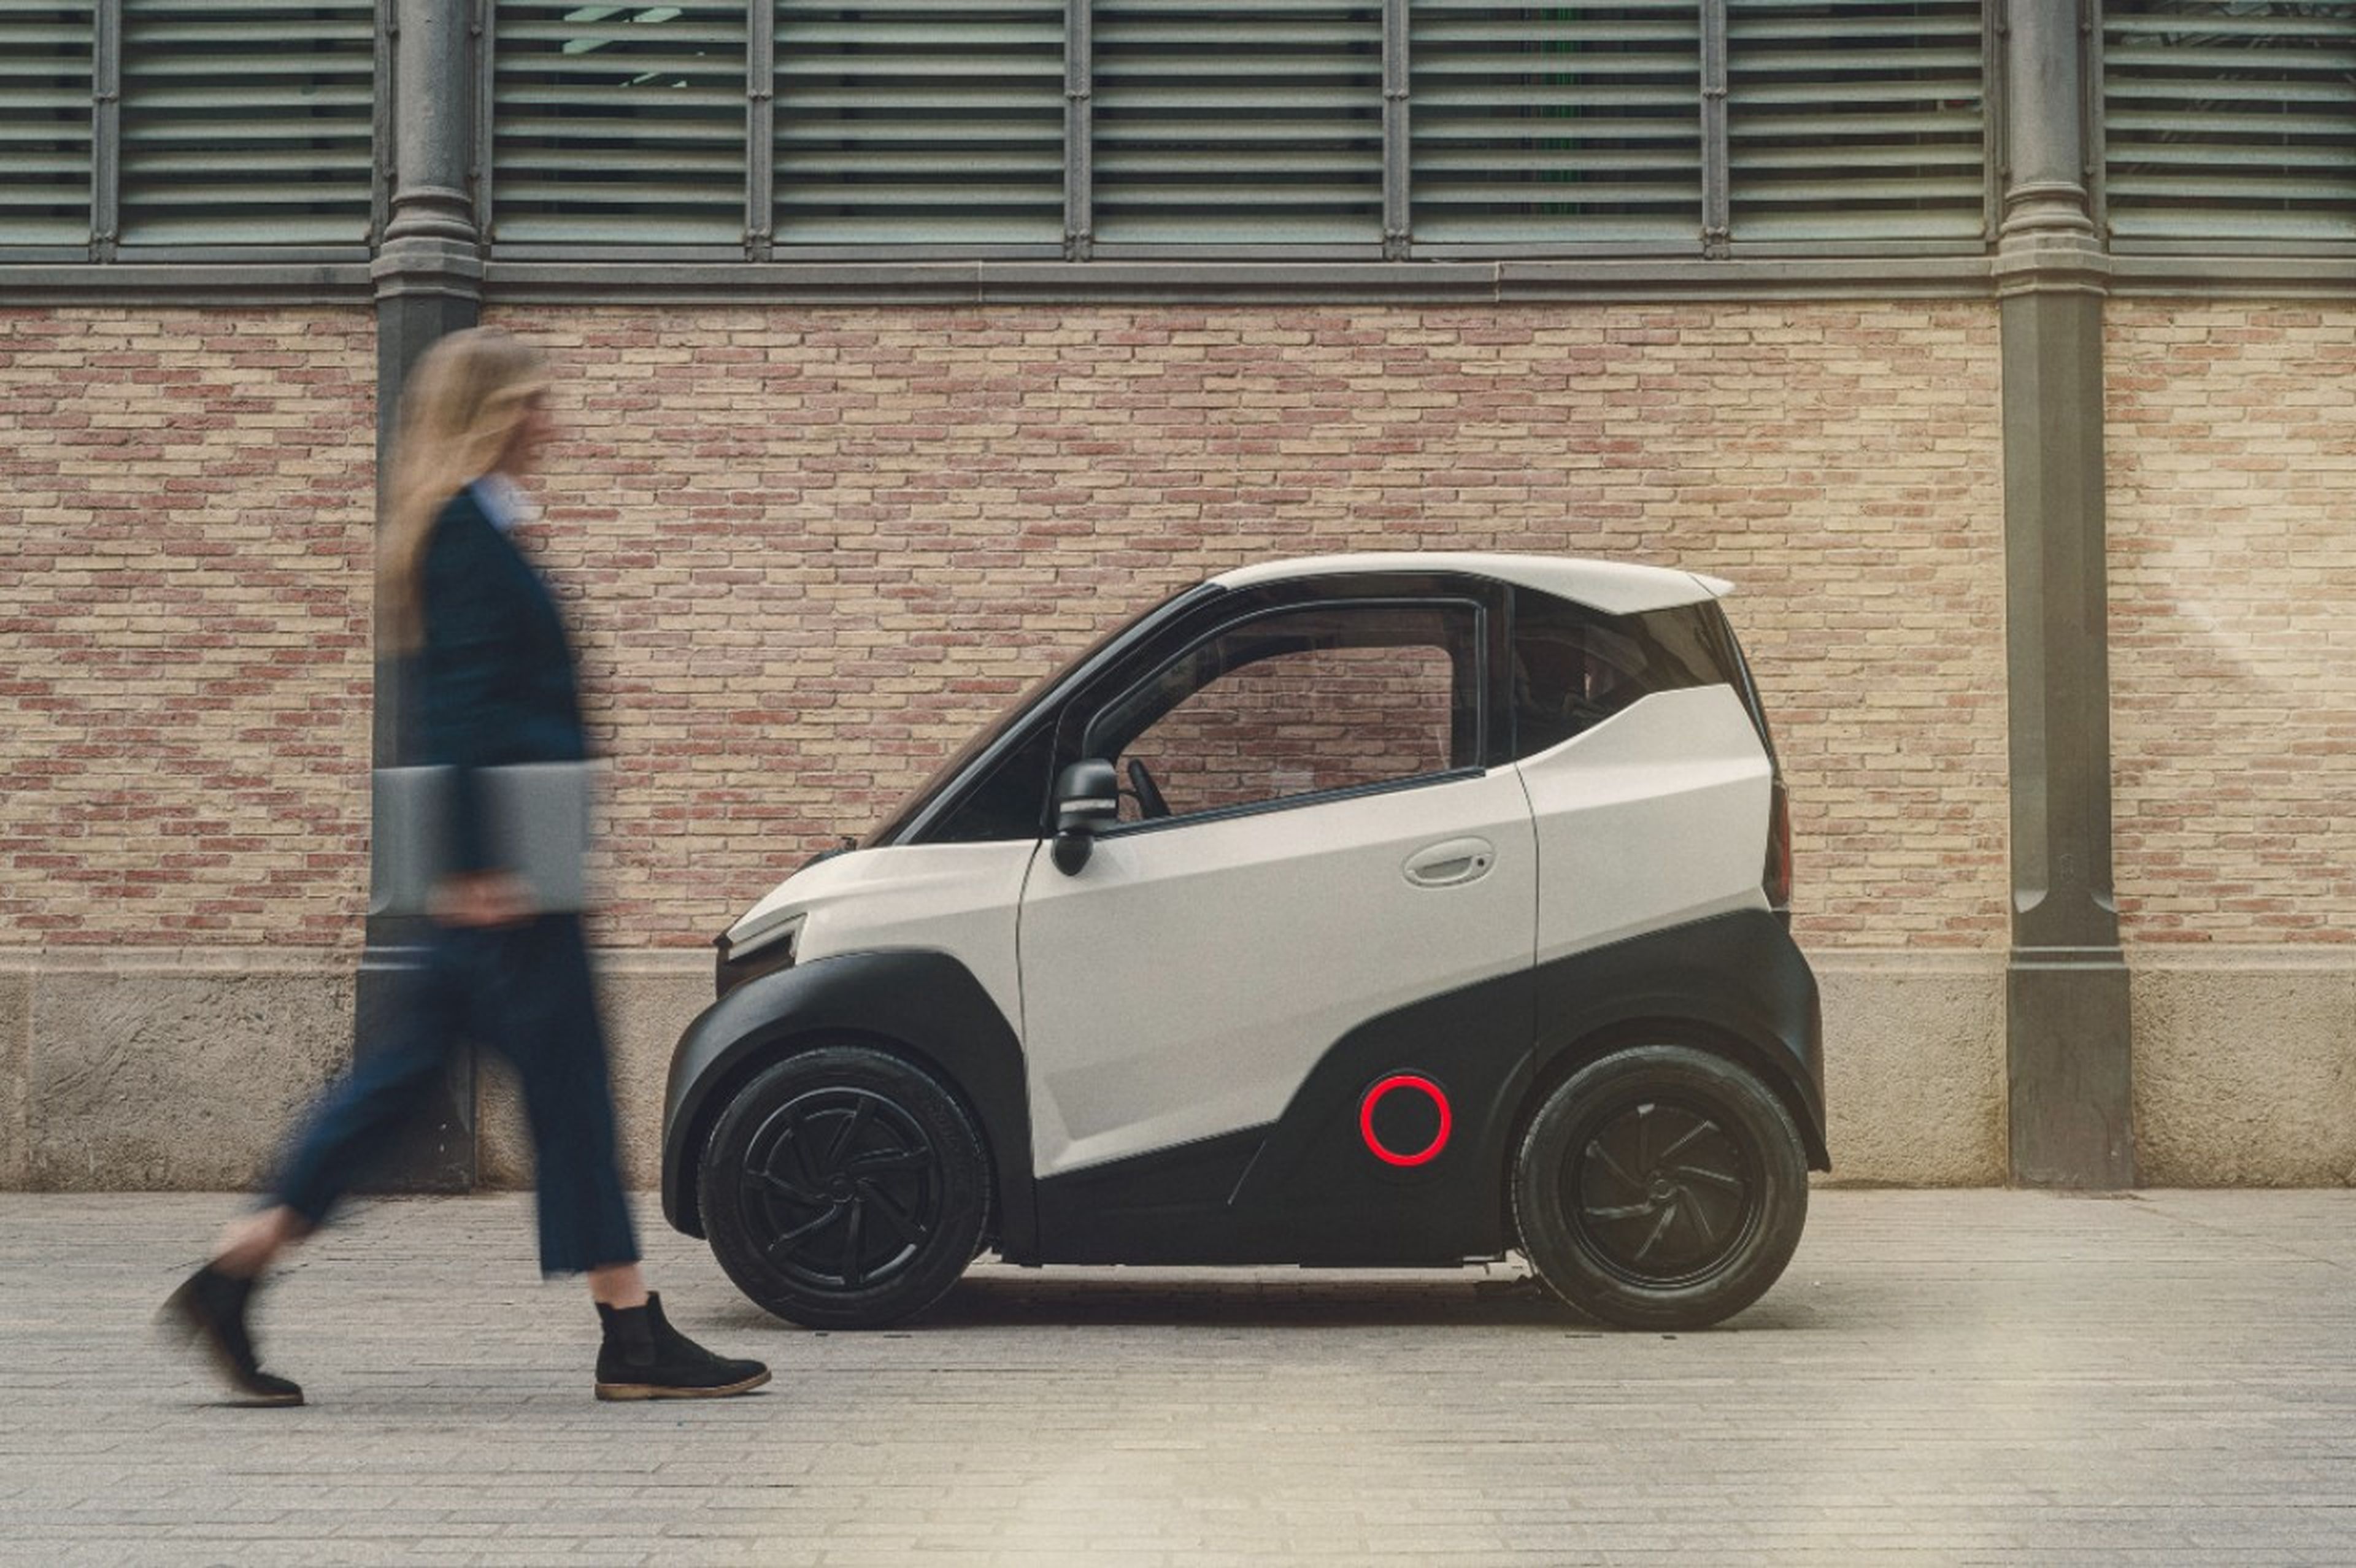 Silence S04, a very small and connected urban electric car